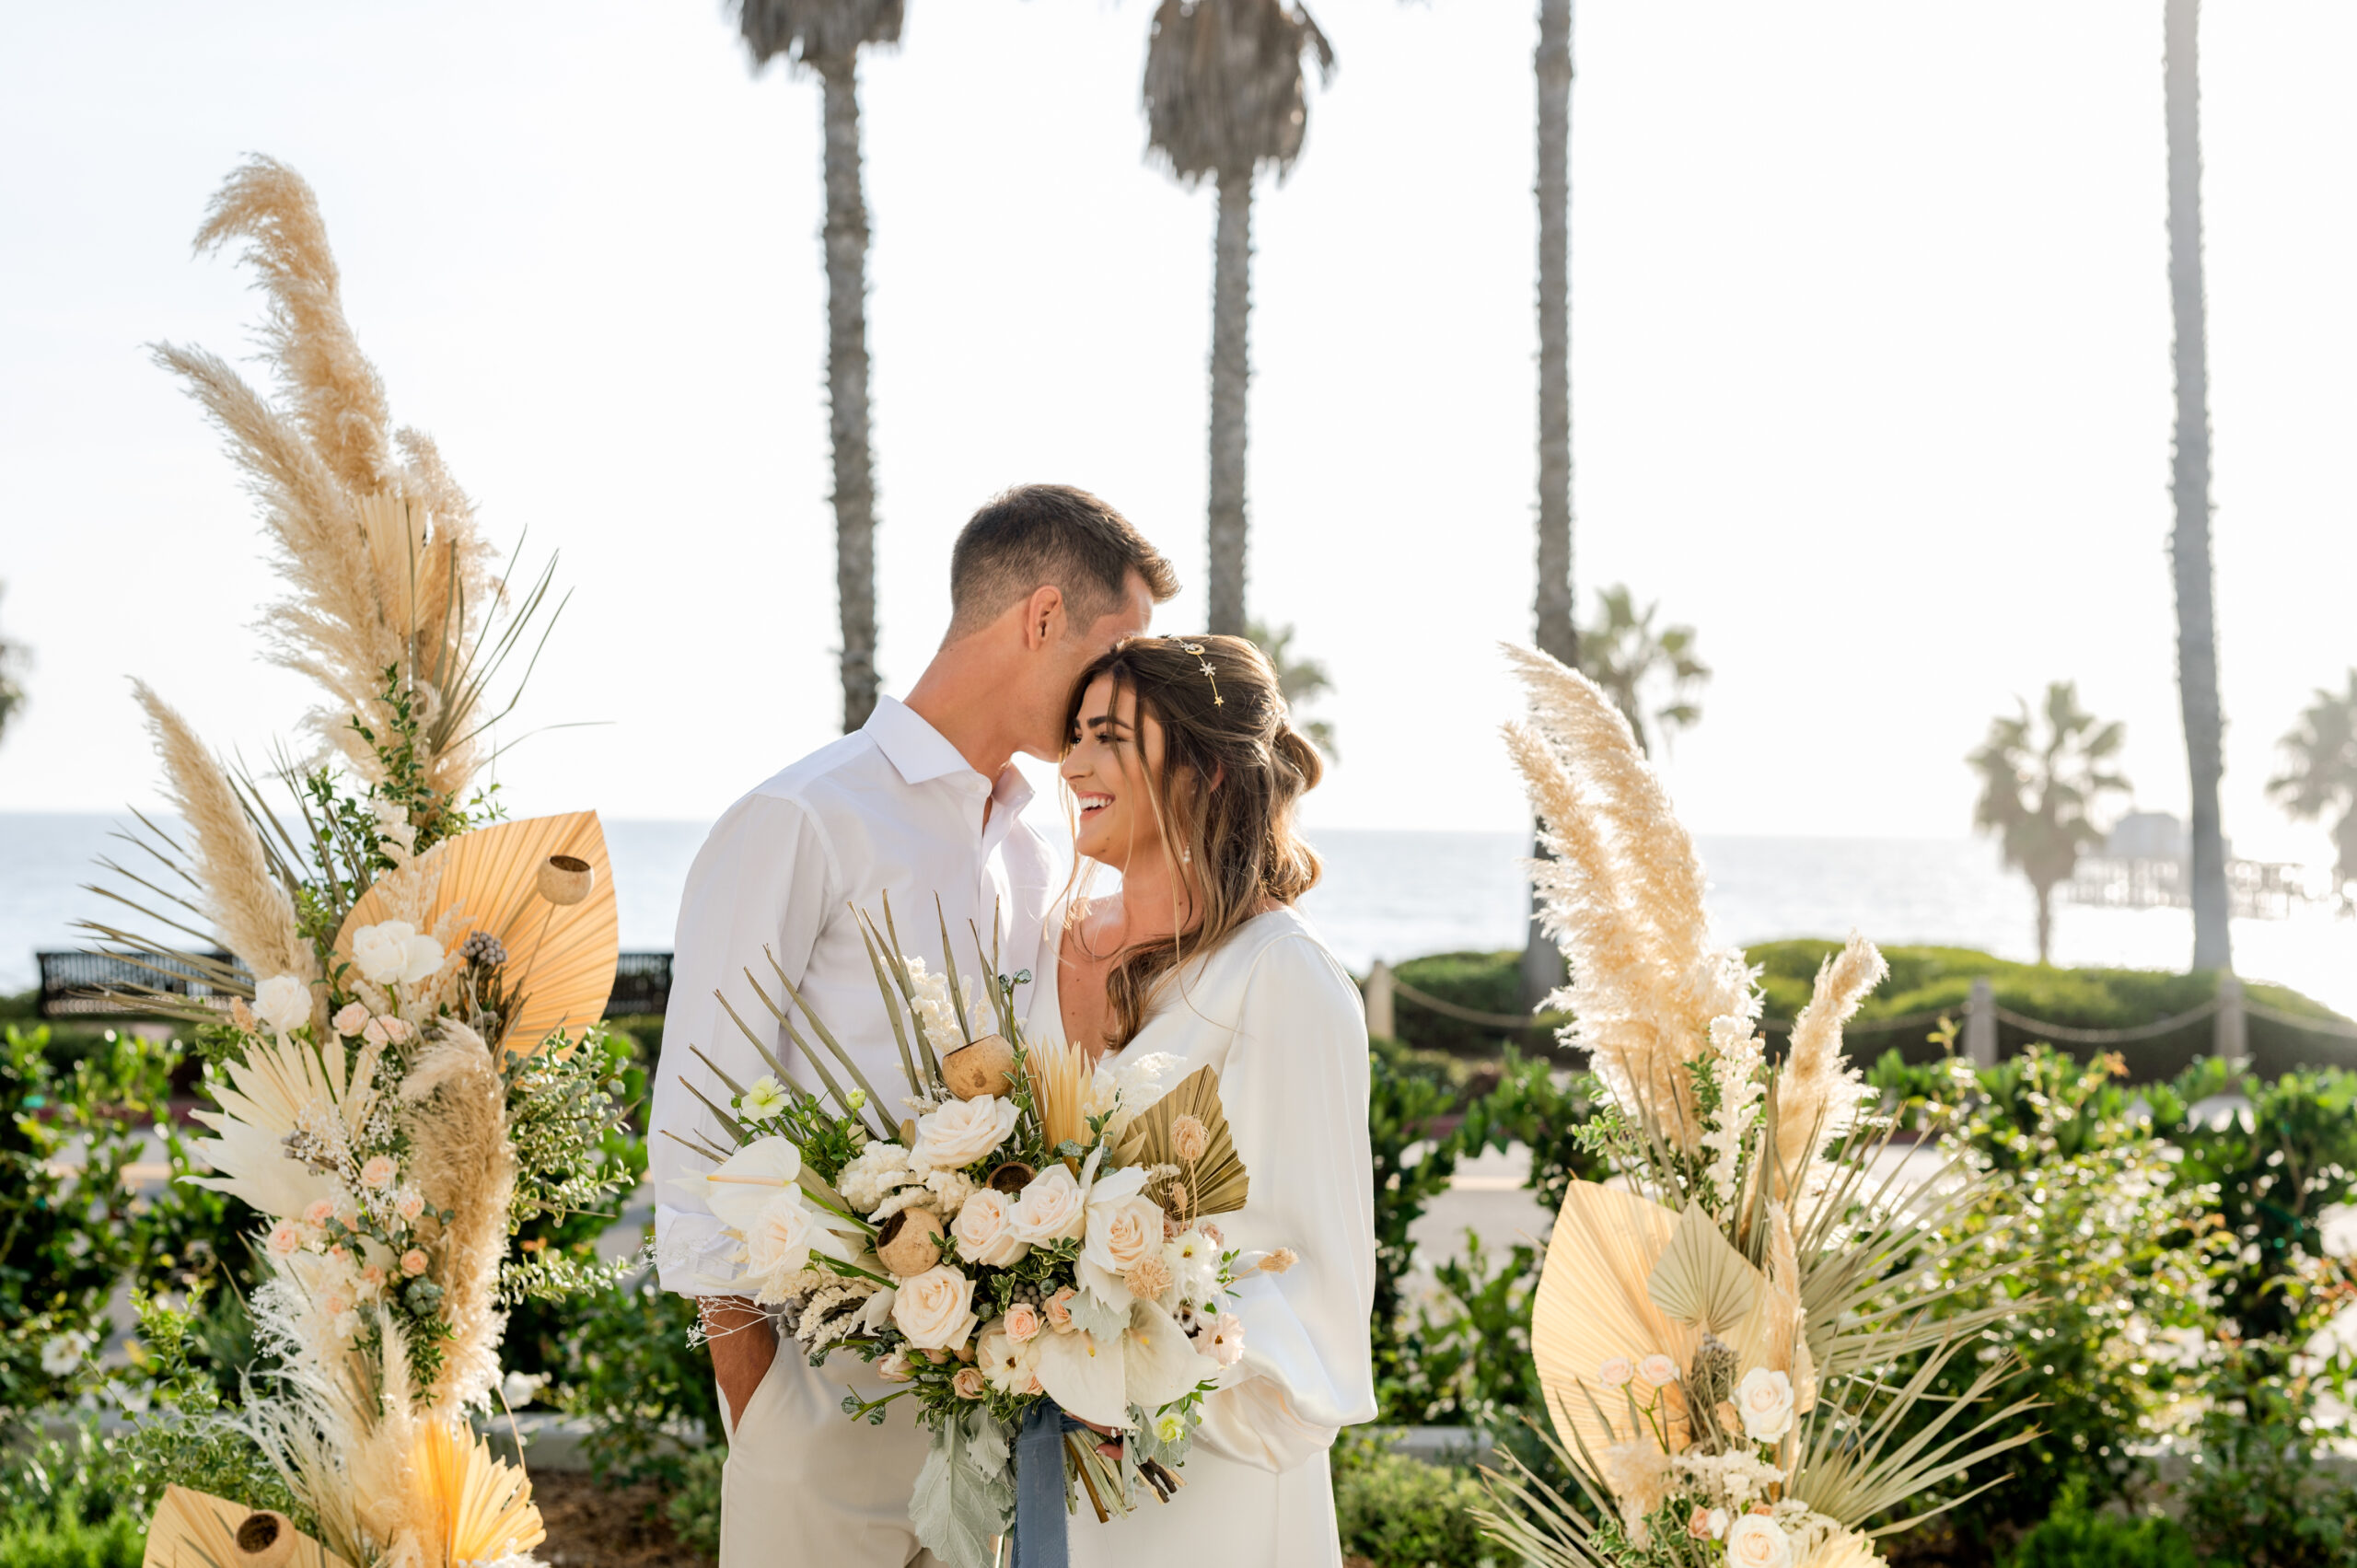 2022 Wedding Trends in Southern California